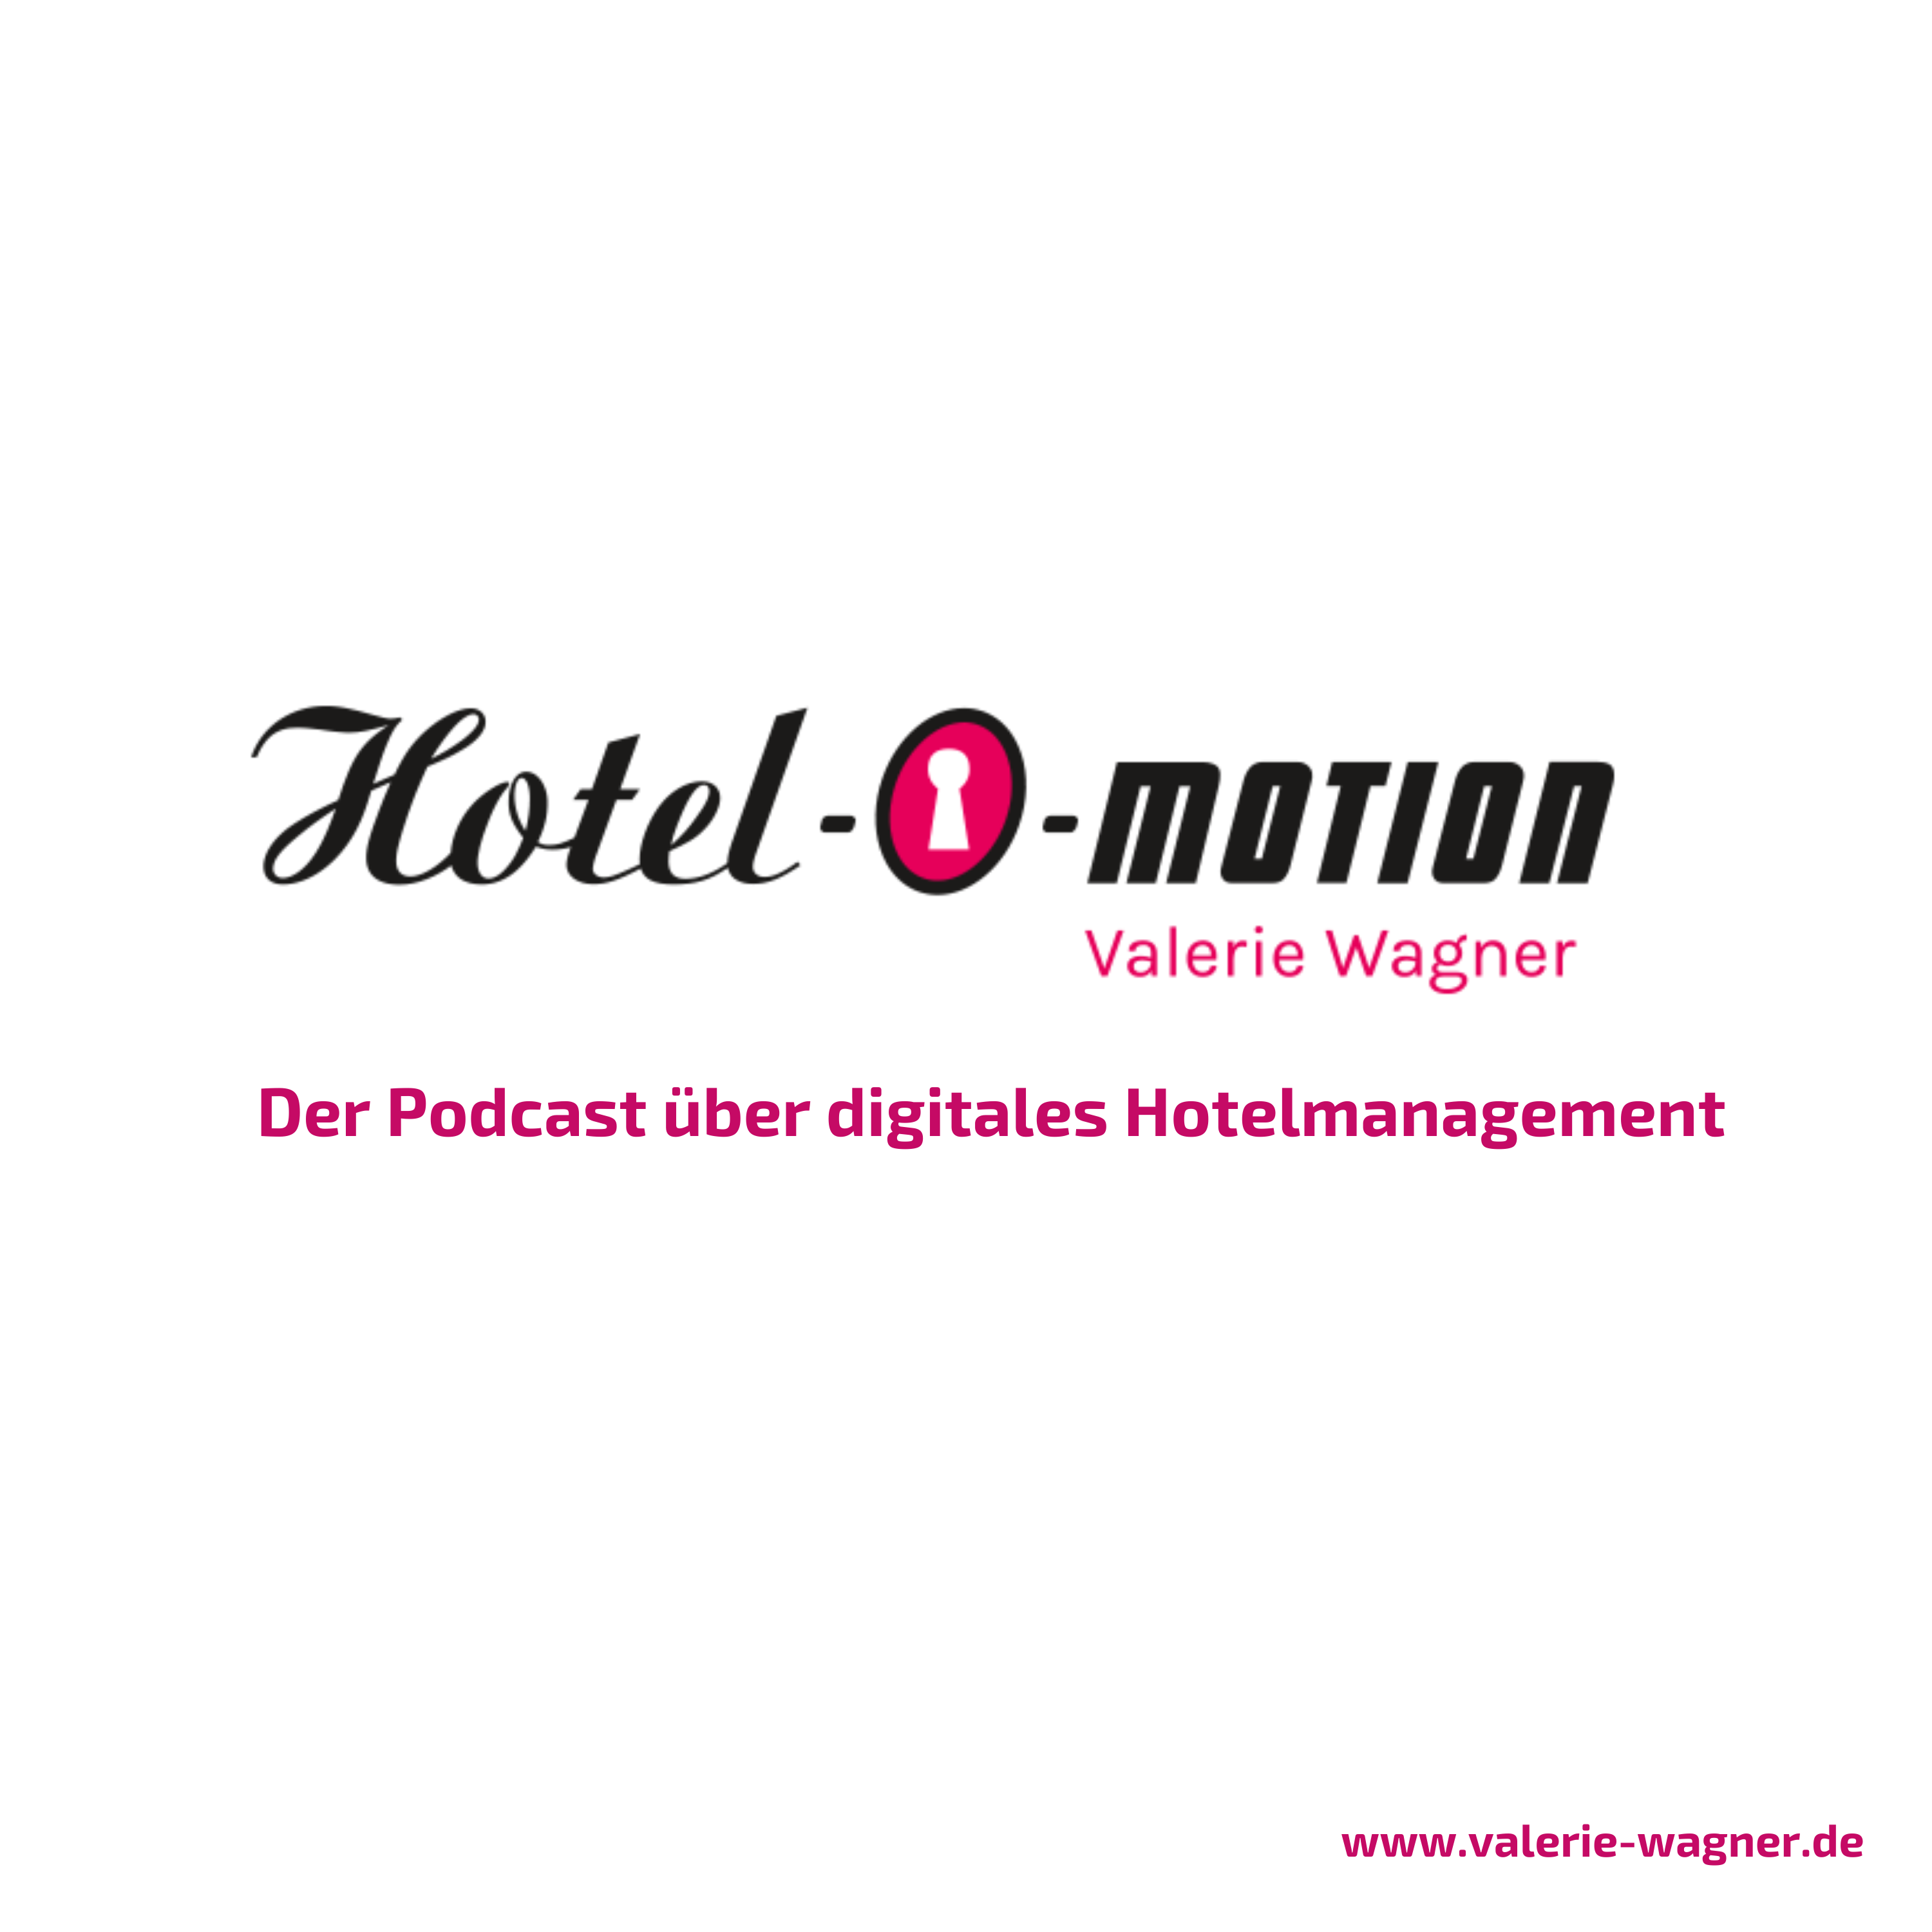 Hotel-O-Motion! on Air